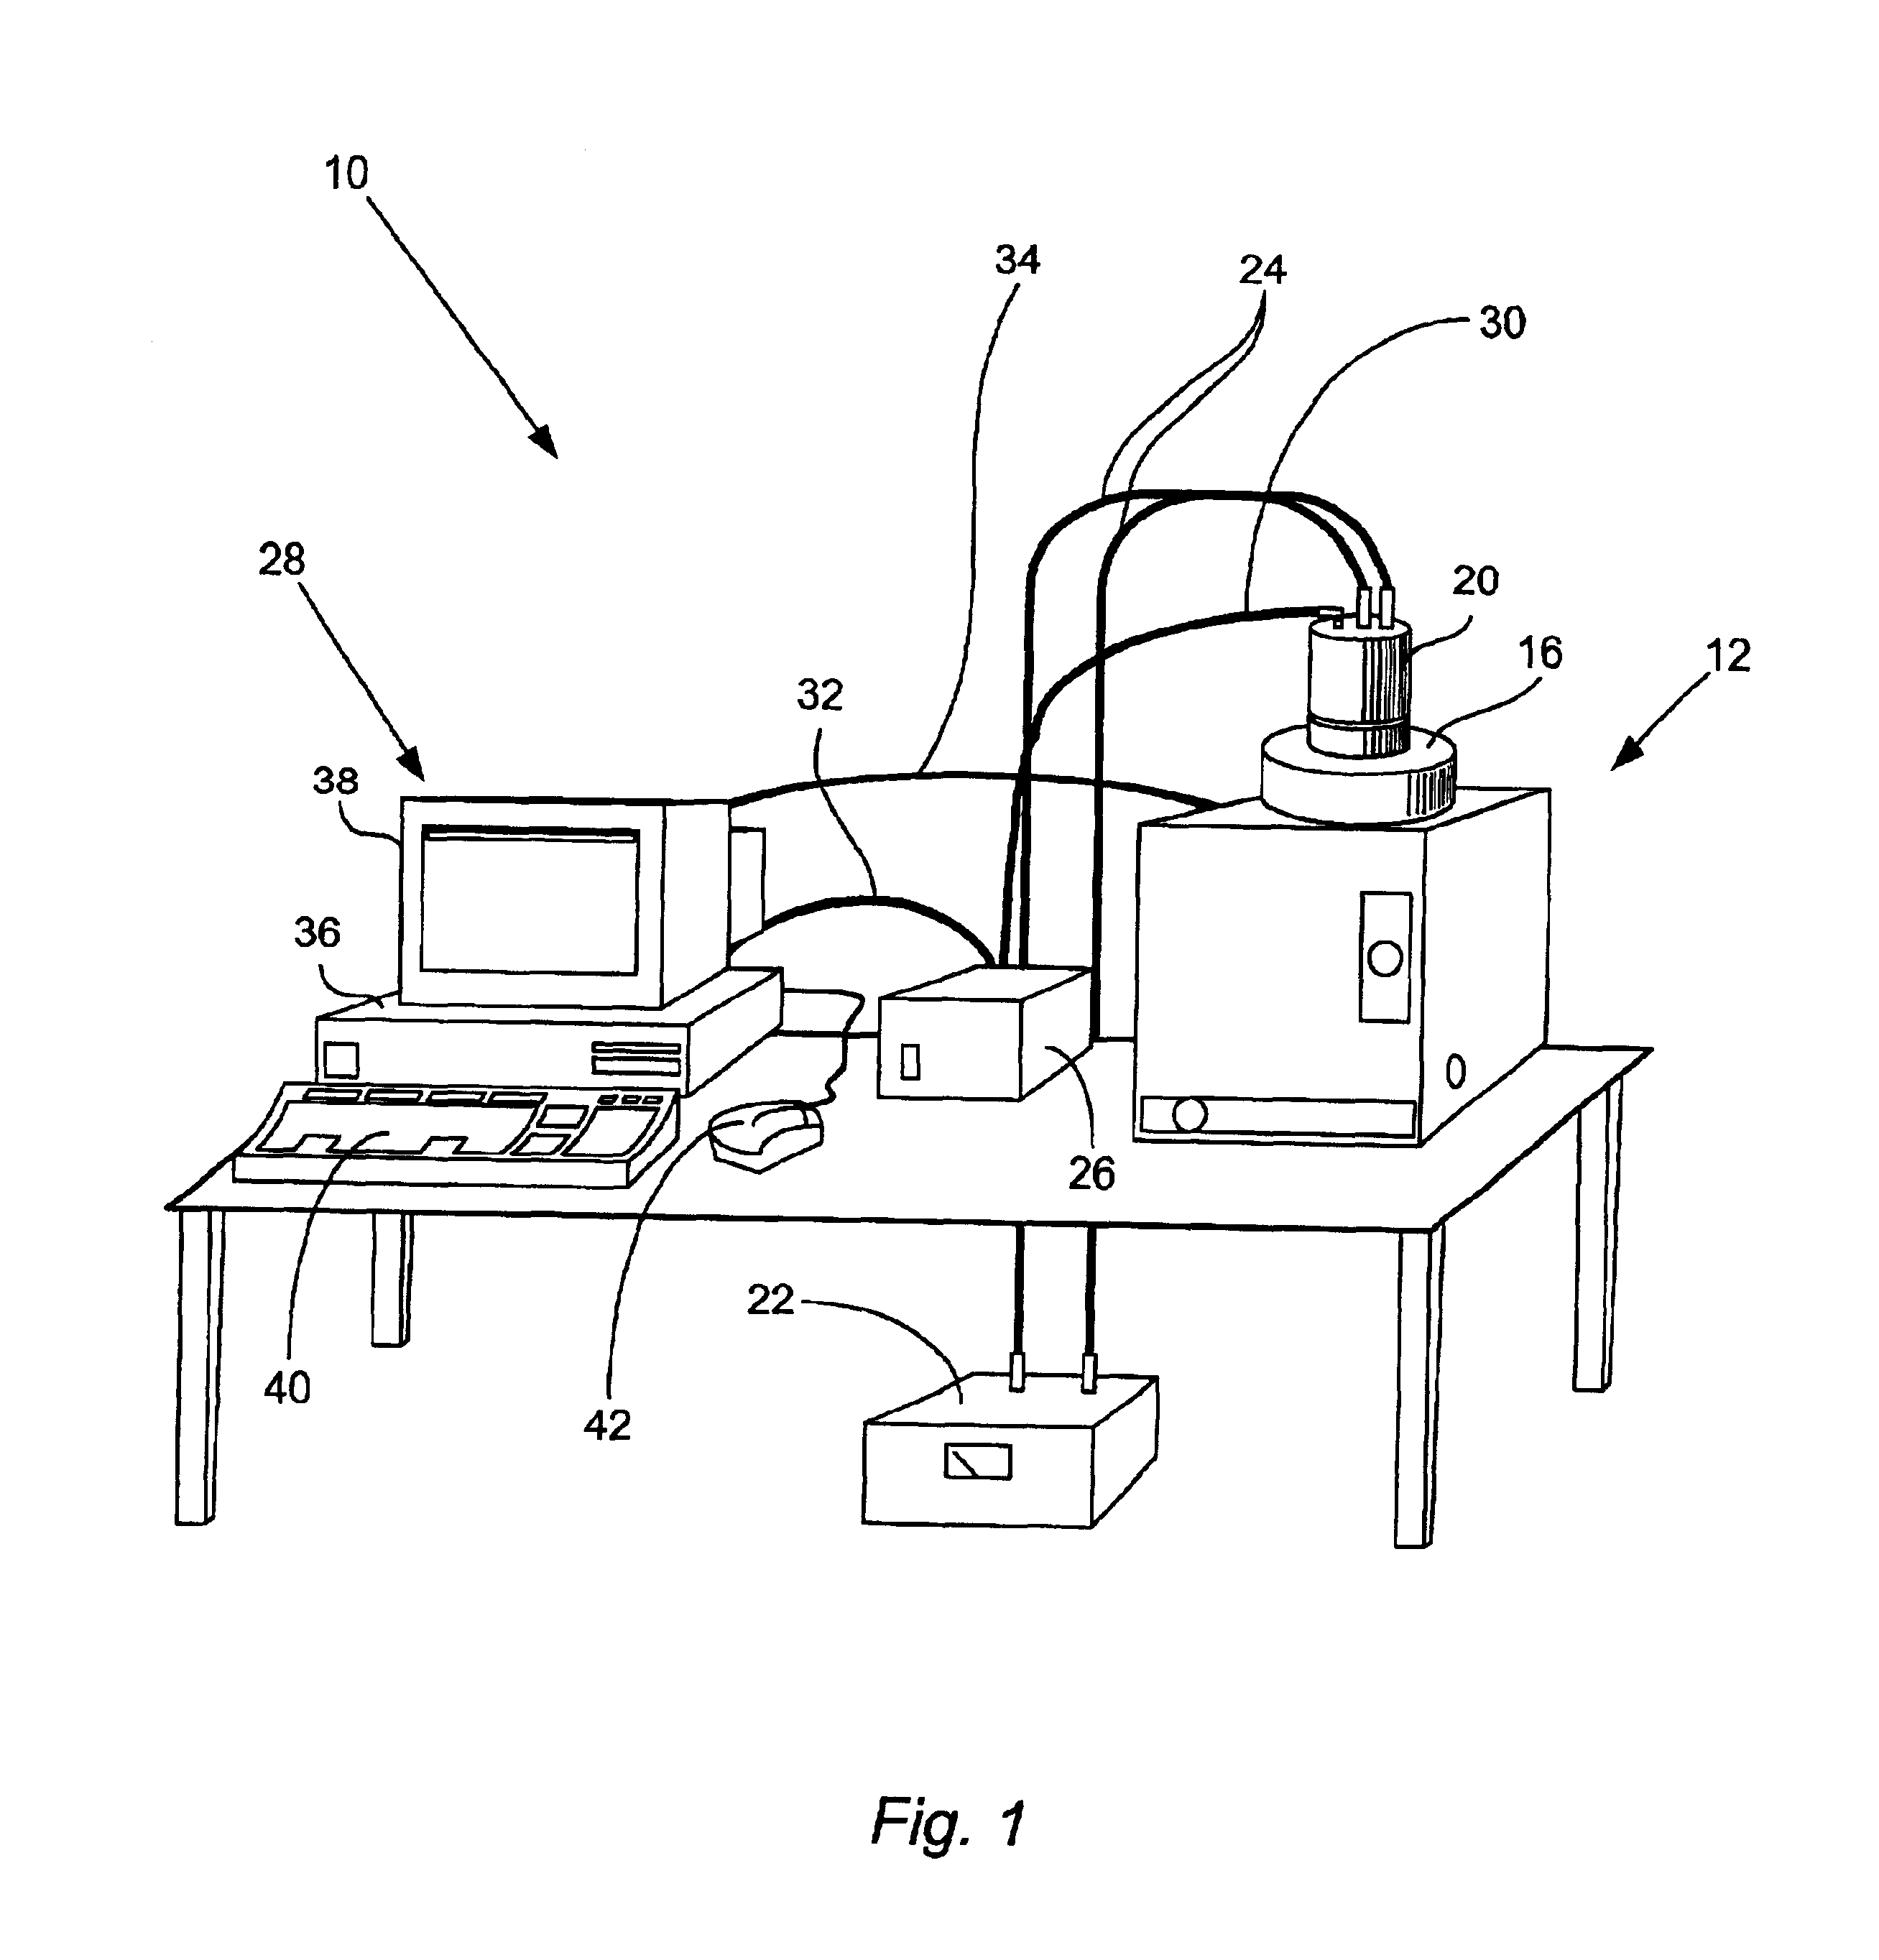 Light calibration device for use in low level light imaging systems